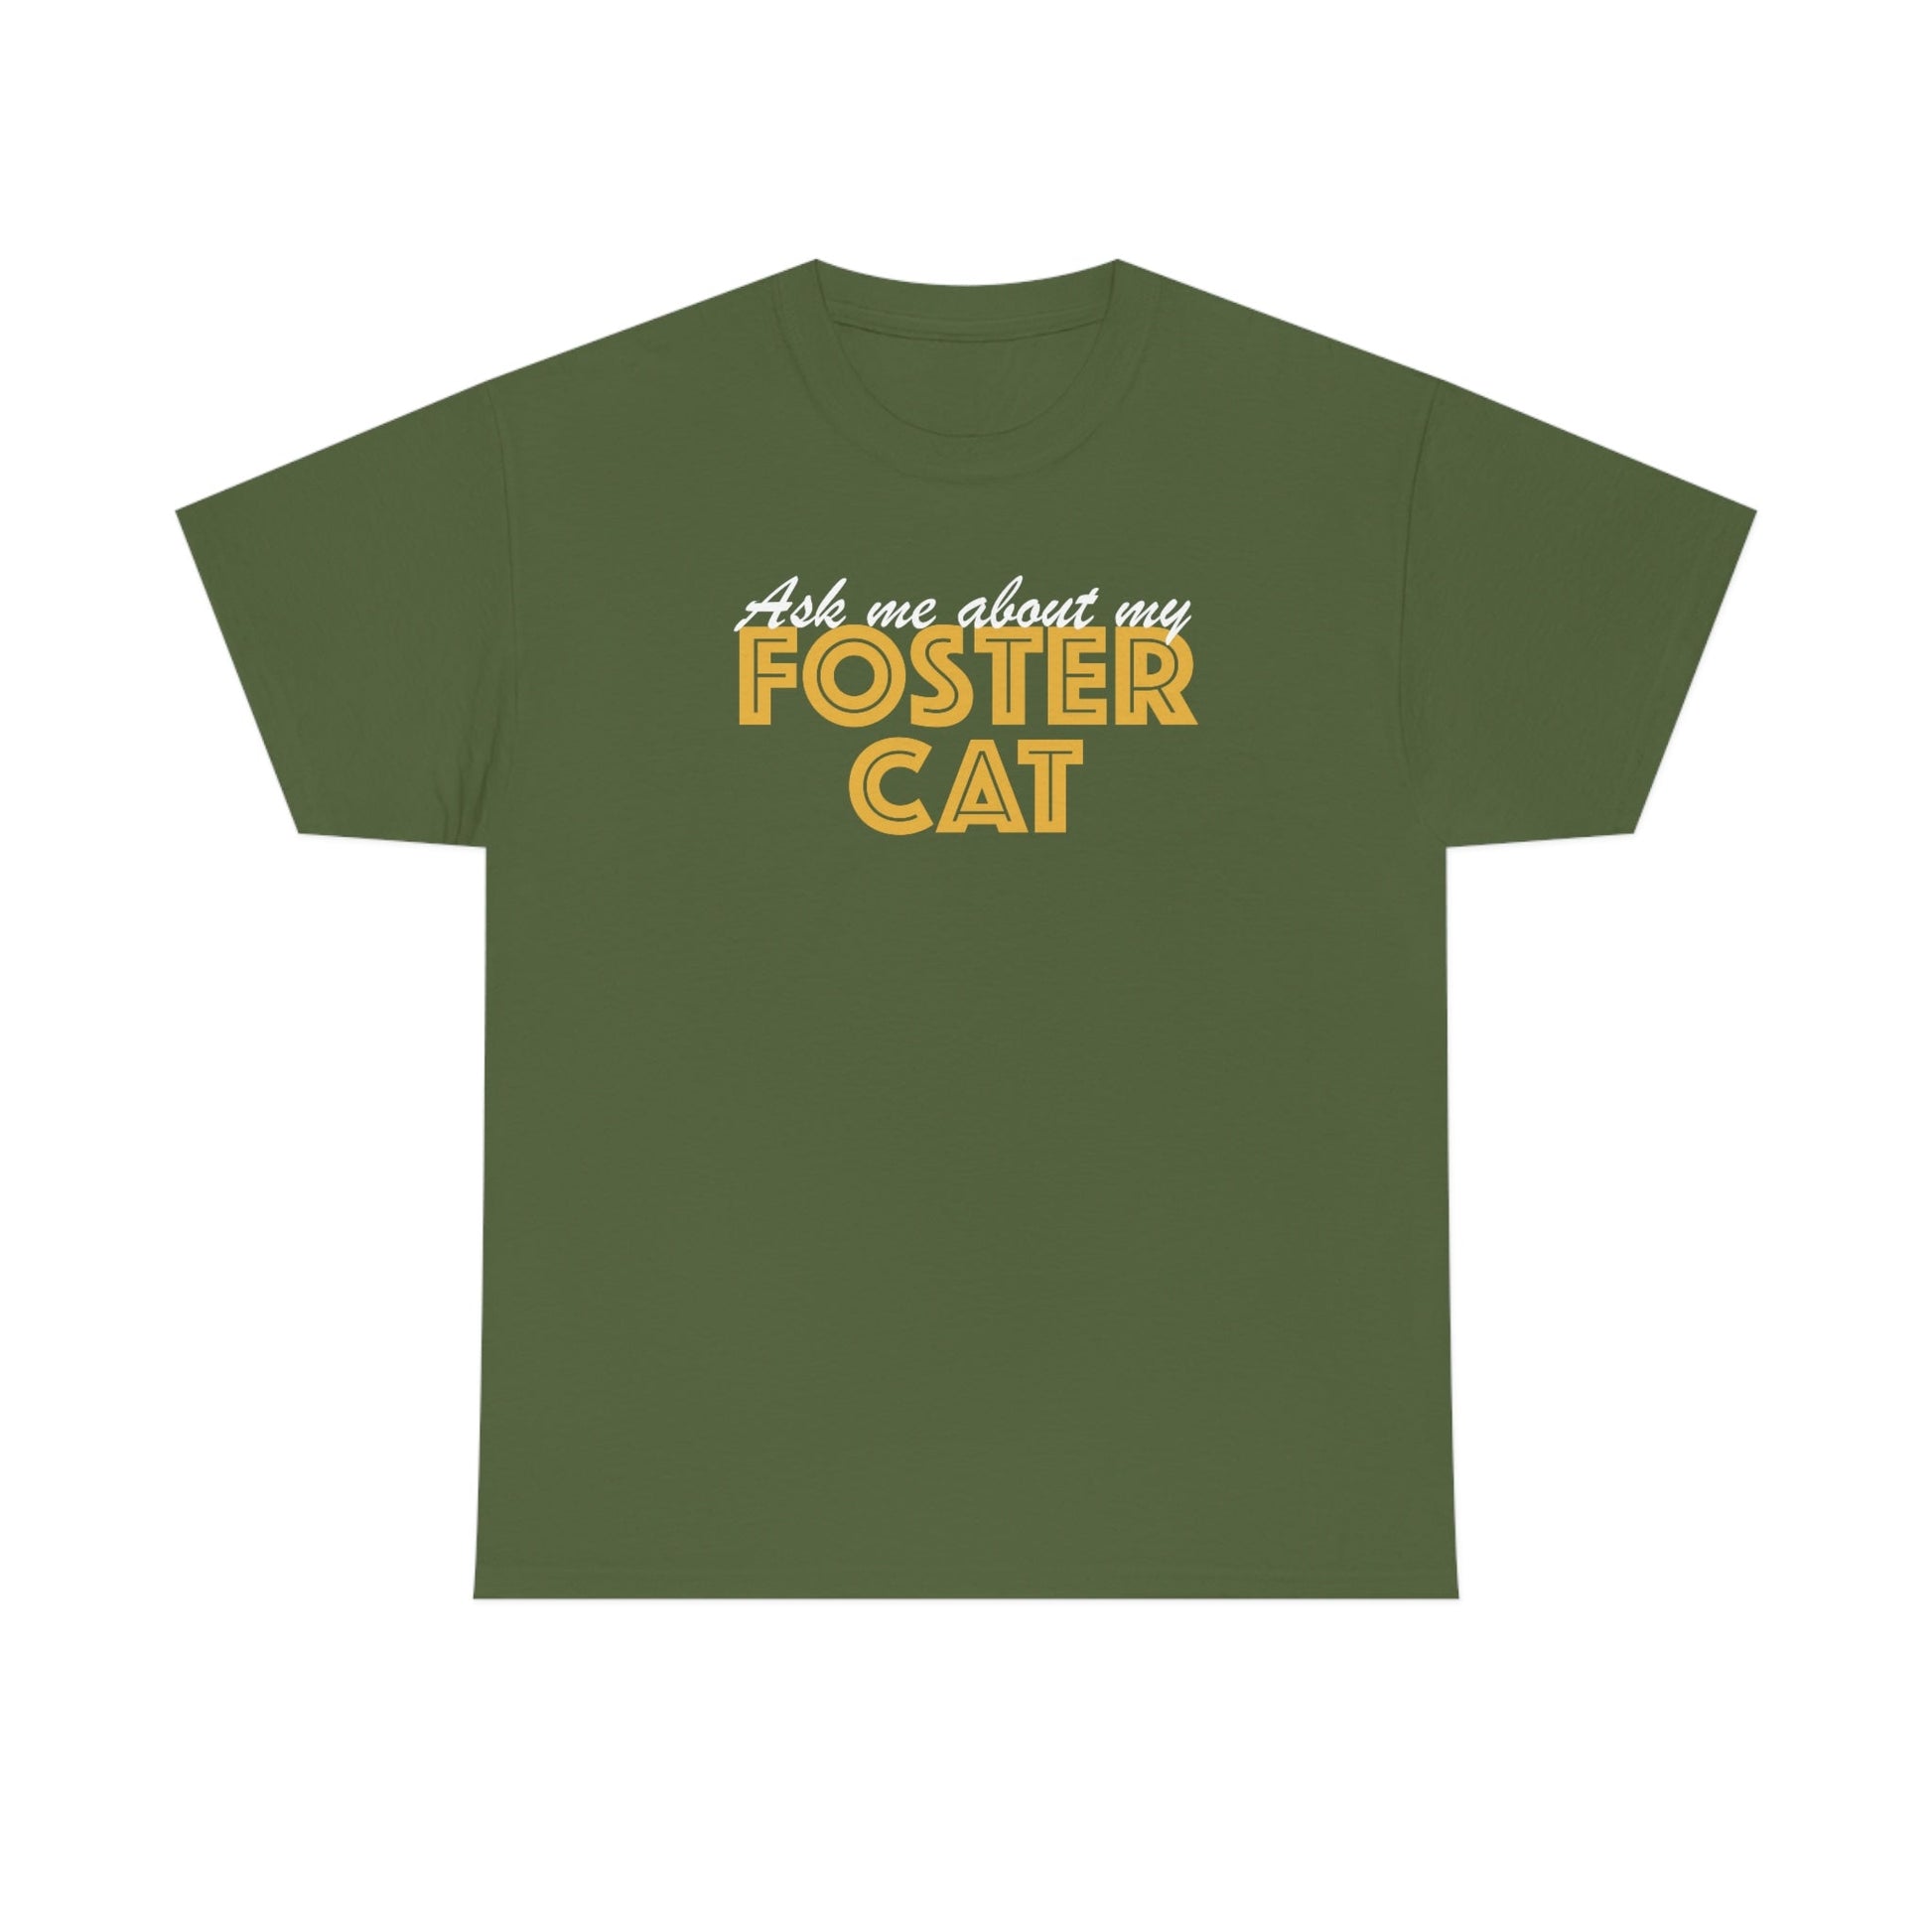 Ask Me About My Foster Cat | Text Tees - Detezi Designs-18415969973562179027